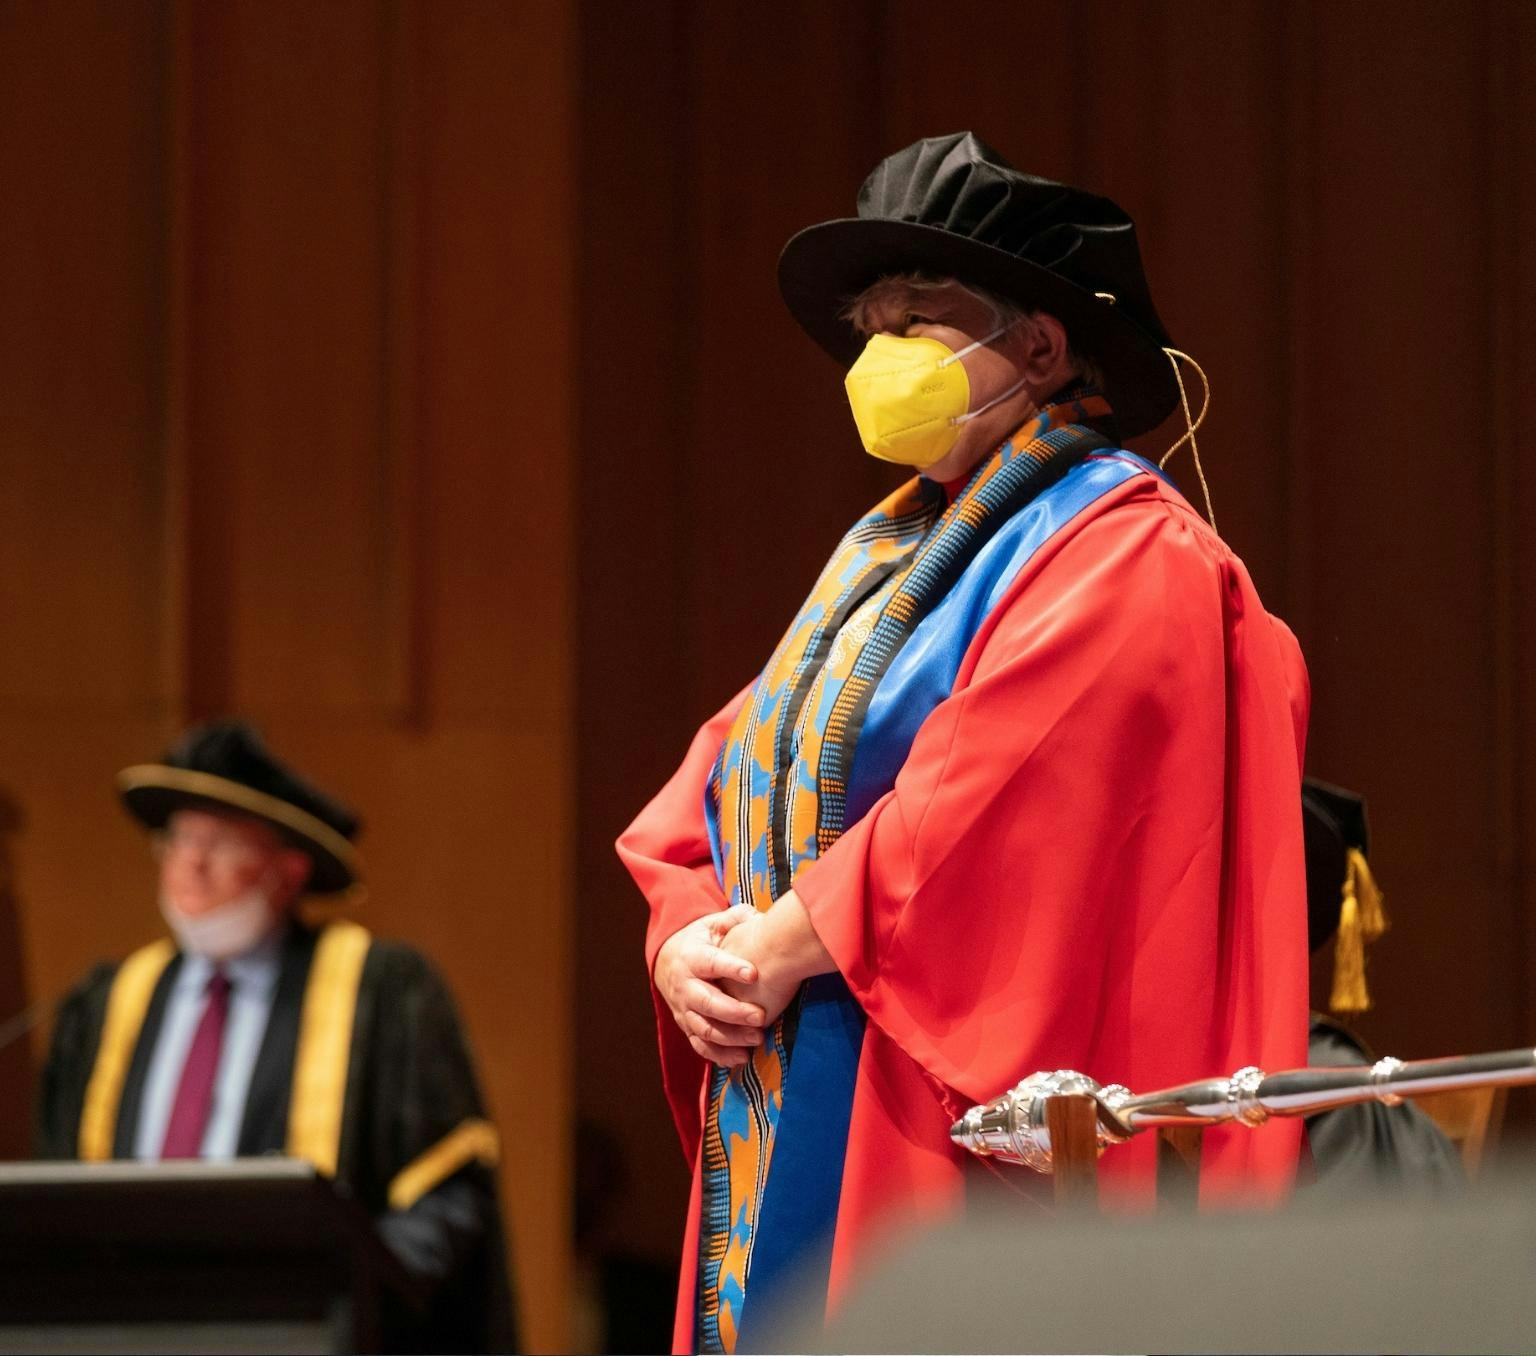 A woman is wearing academic regalia including a red and blue robe, and a large black hat. she is also wearing a yellow face mask